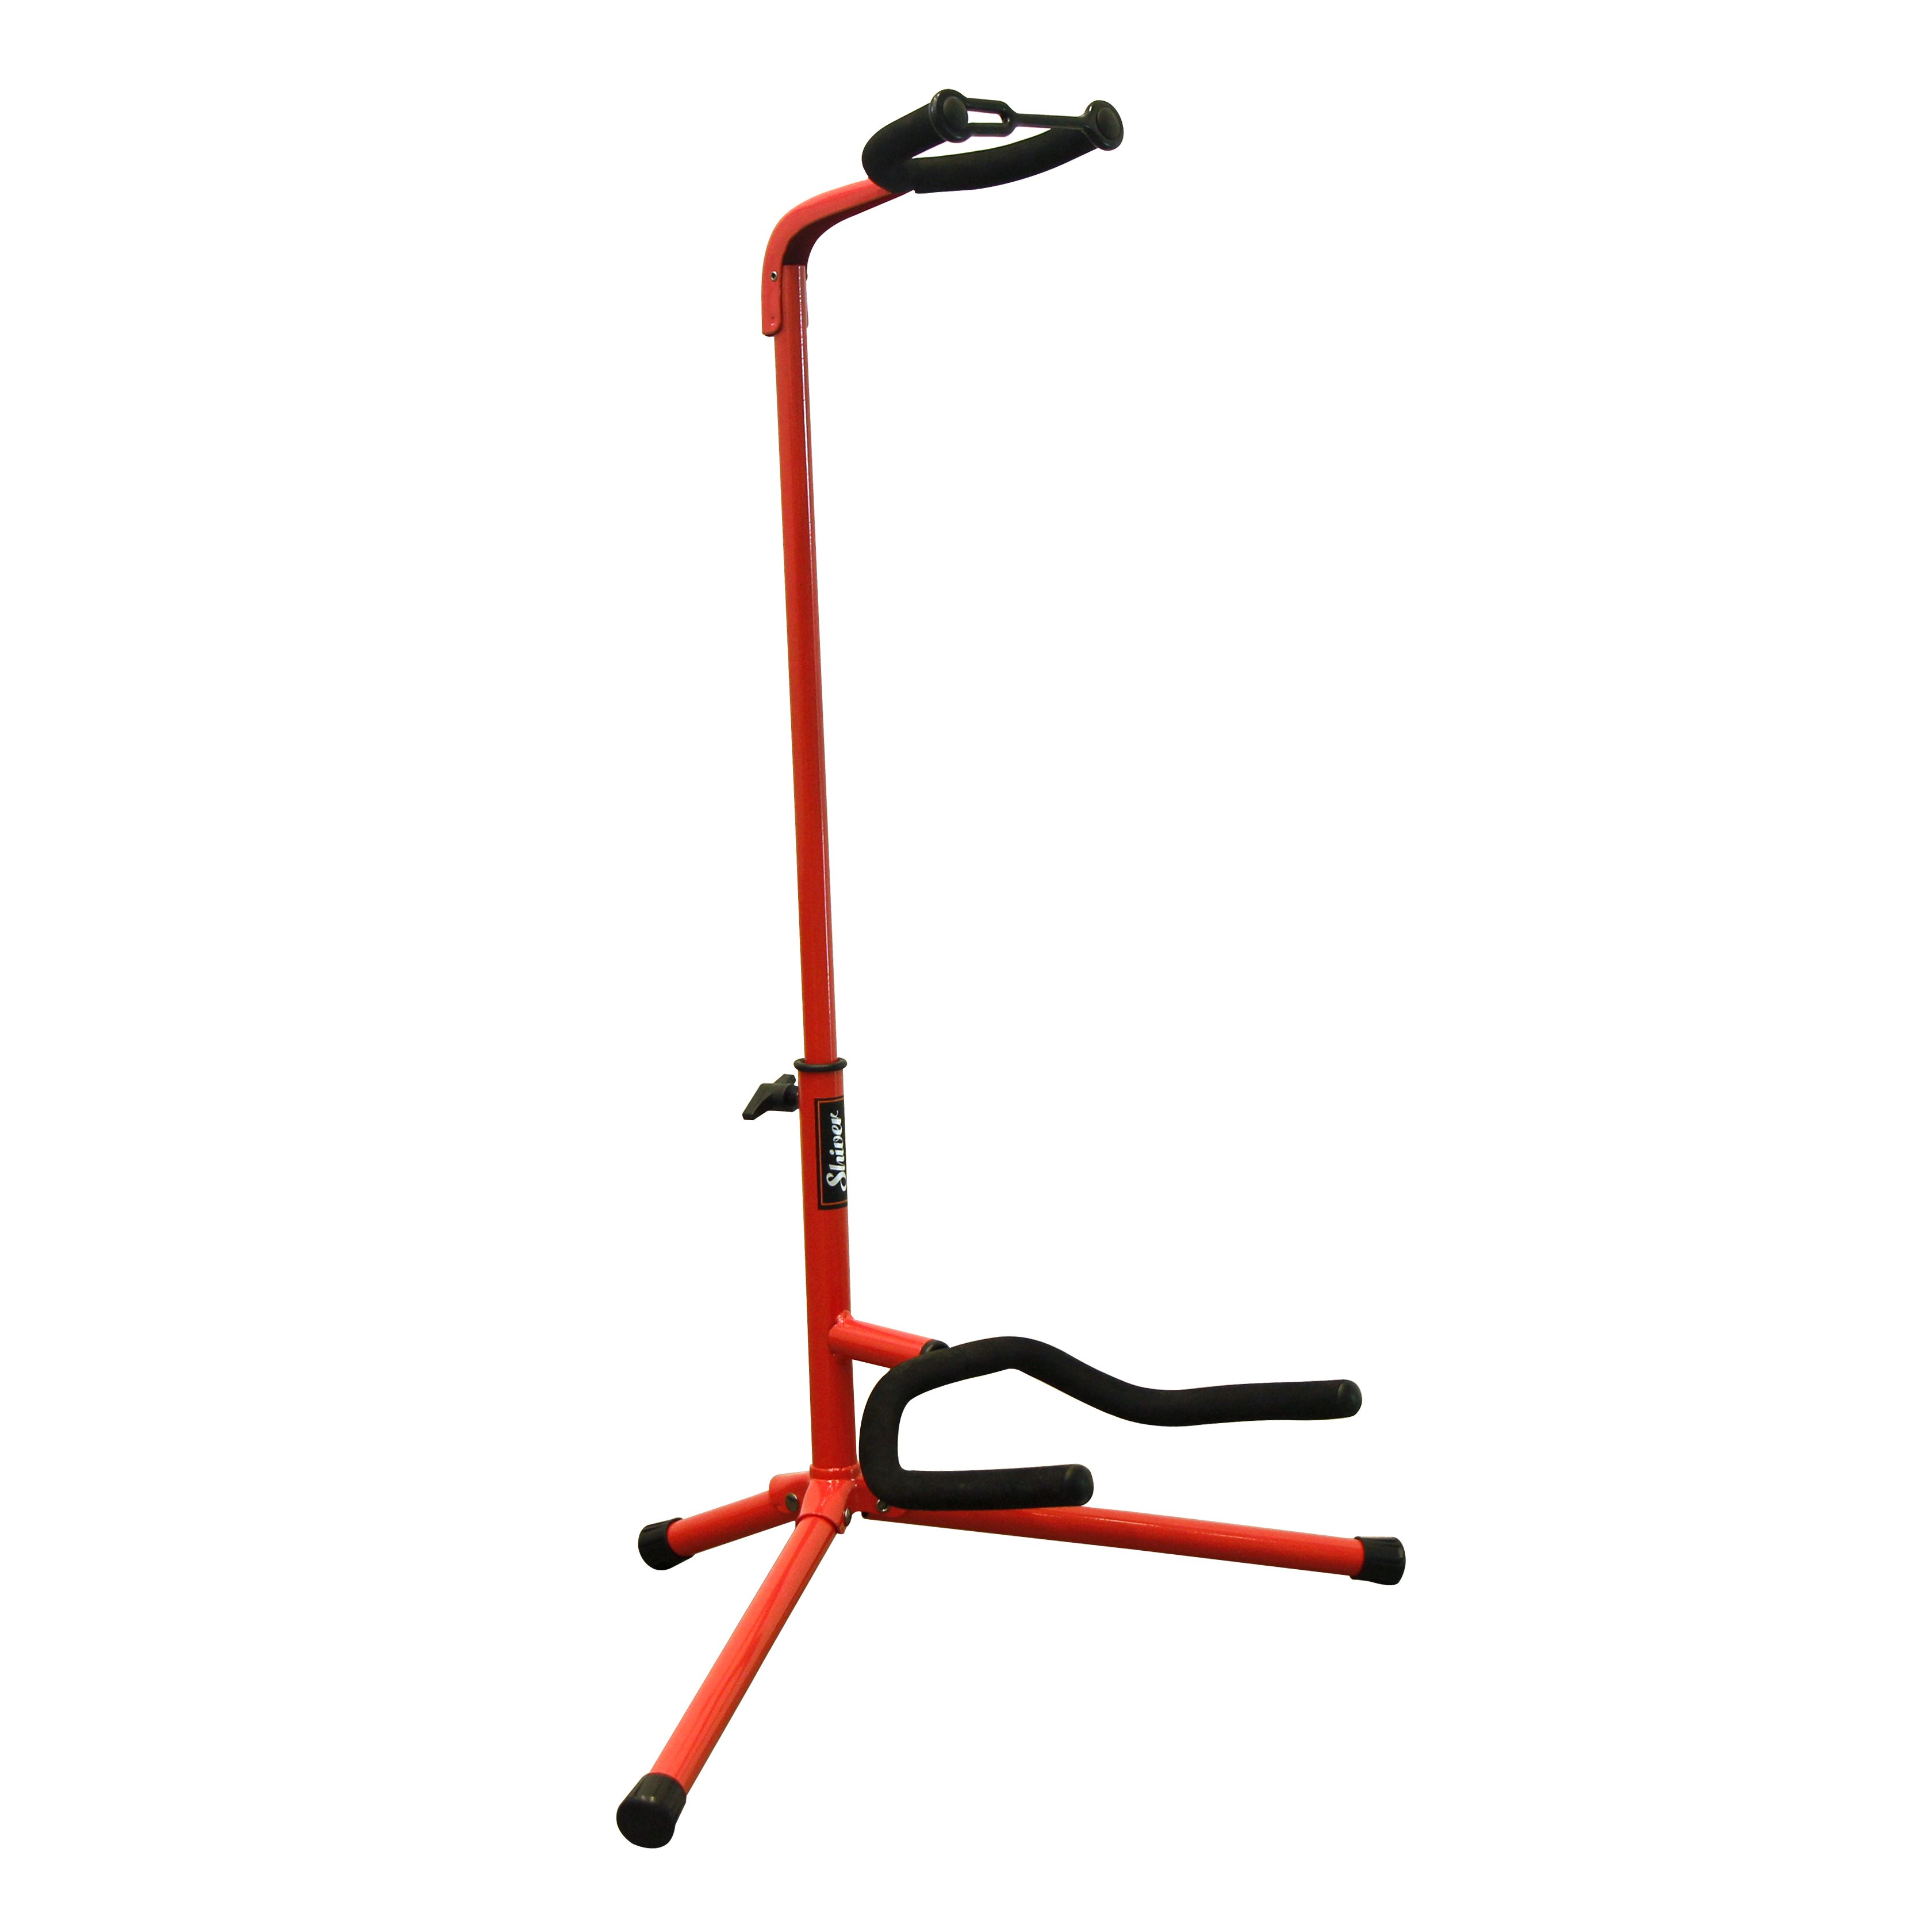 Shiver - Stand guitare col de cygne basic - Rouge